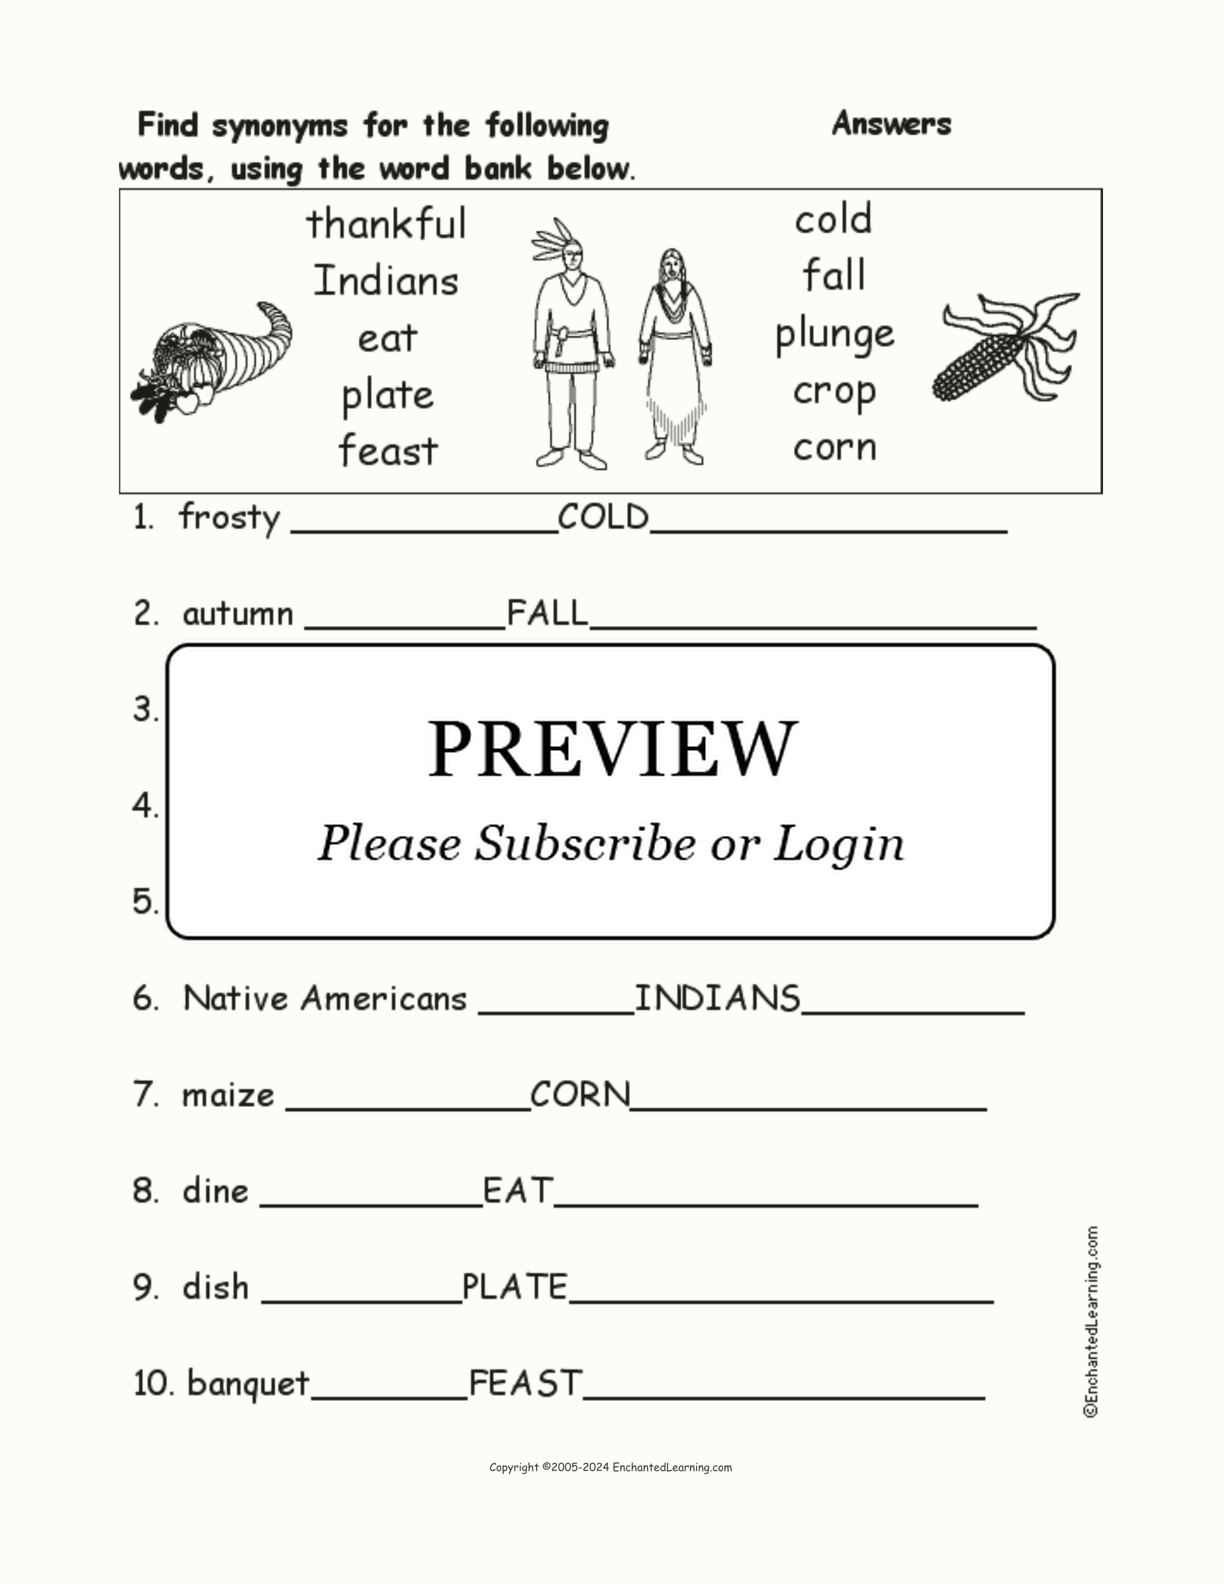 Thanksgiving Synonyms interactive worksheet page 2